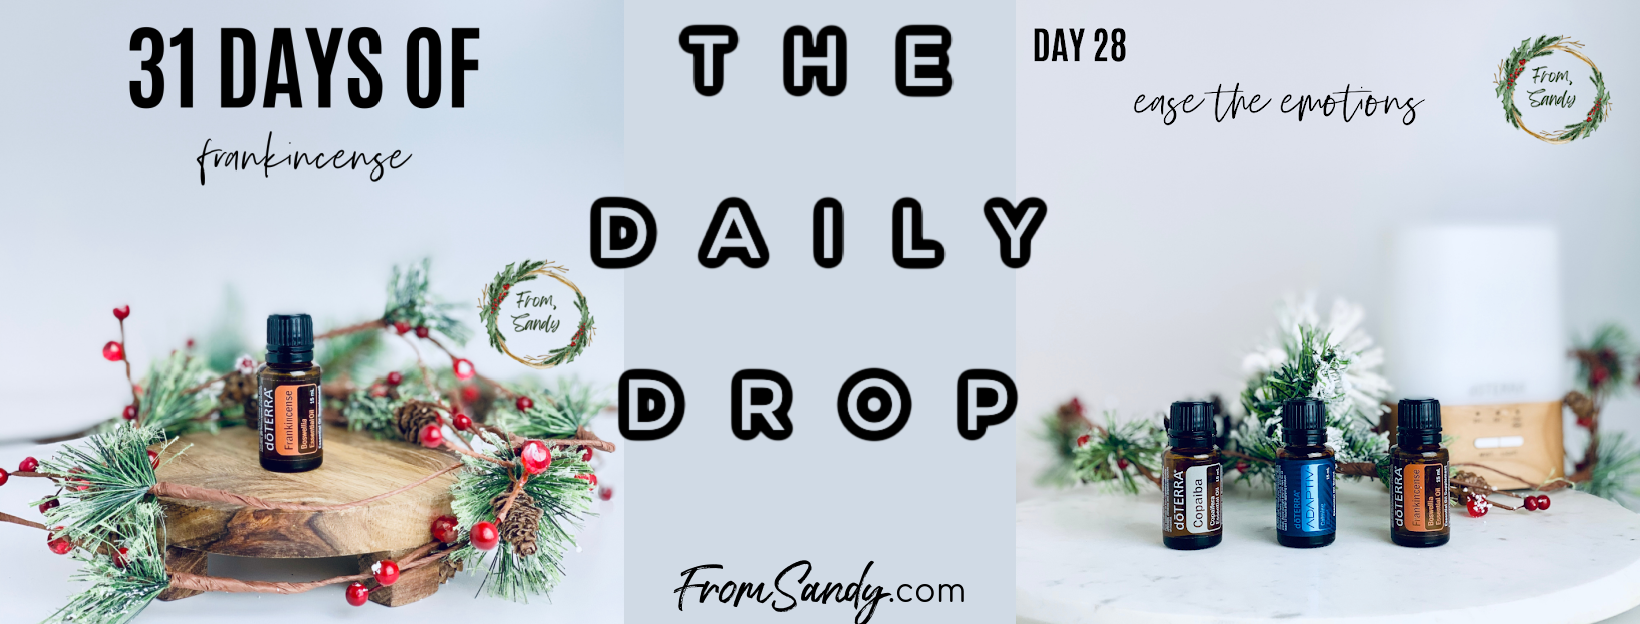 Ease the Emotions (31 Days of Frankincense: Day 28), From Sandy